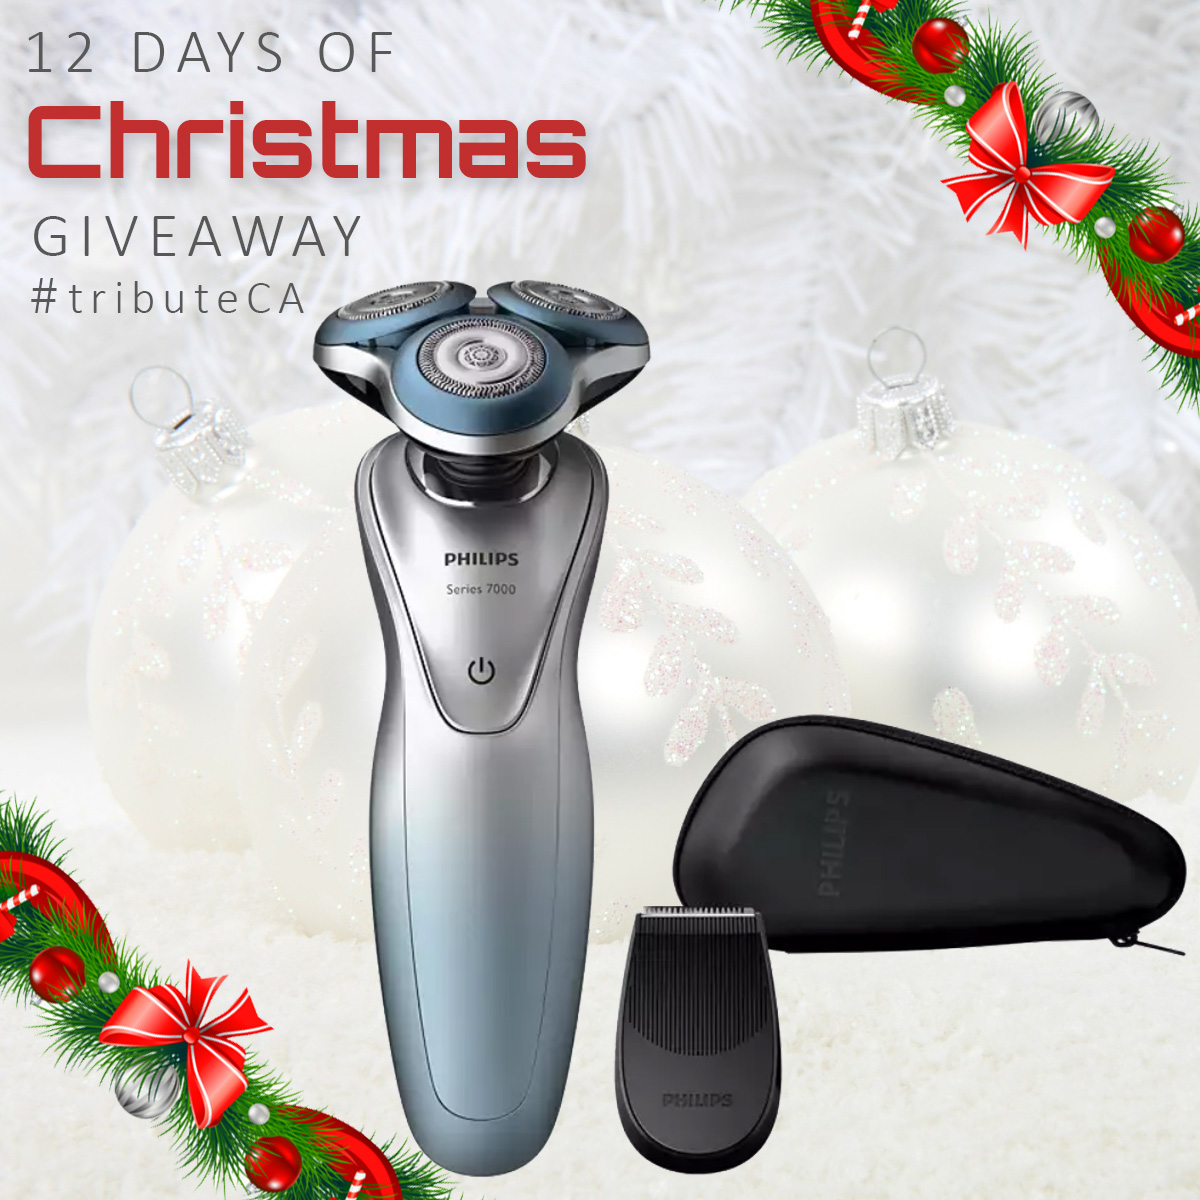 12 Days of Christmas giveaway: Day 5 - Philips S7000 electric shaver